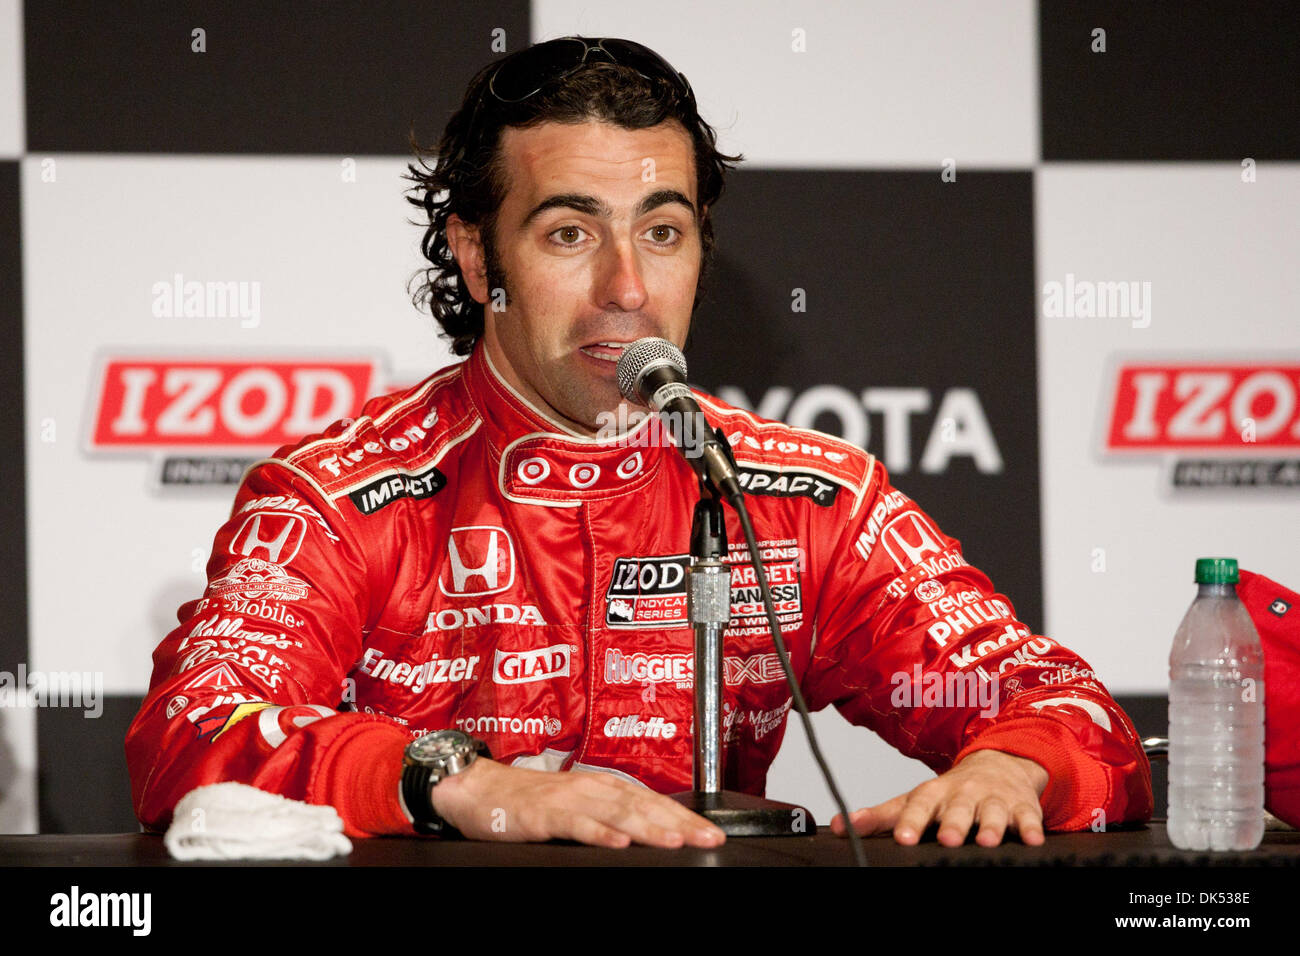 Apr. 17, 2011 - Long Beach, California, U.S - Dario Franchitti driver of the #10 Target Chip Ganassi Racing Dallara Honda answers questions during the post race press confrence of the IndyCar Series 37th annual Toyota Grand Prix of Long Beach. (Credit Image: © Brandon Parry/Southcreek Global/ZUMAPRESS.com) Stock Photo